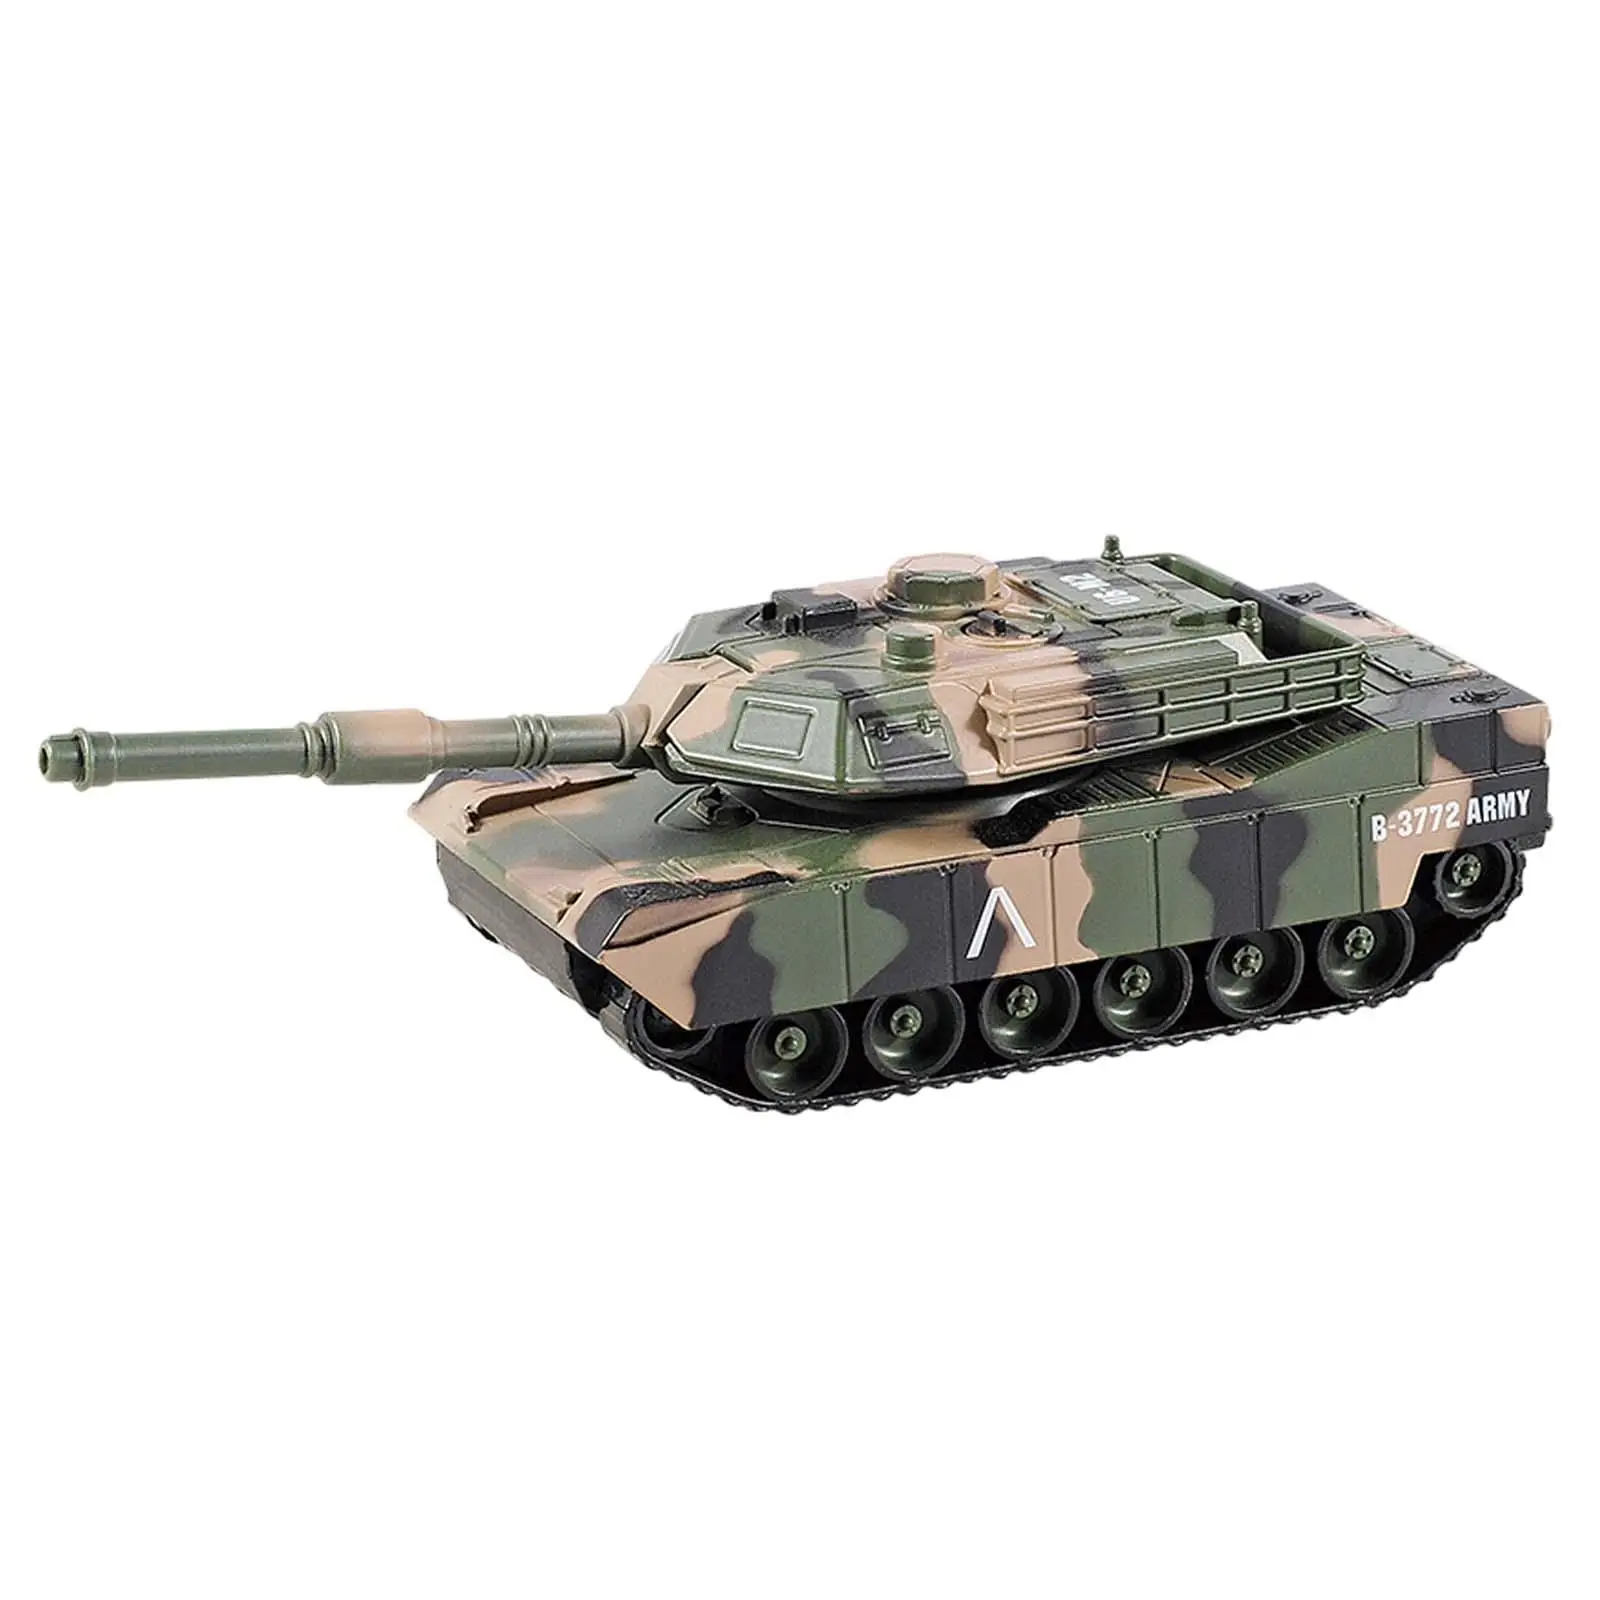 1/24 Tank Toy Educational Toys Vehicle Rotating Fort Creative Party Favors Realistic Vehicle for Girls Boys Kids Birthday Gift